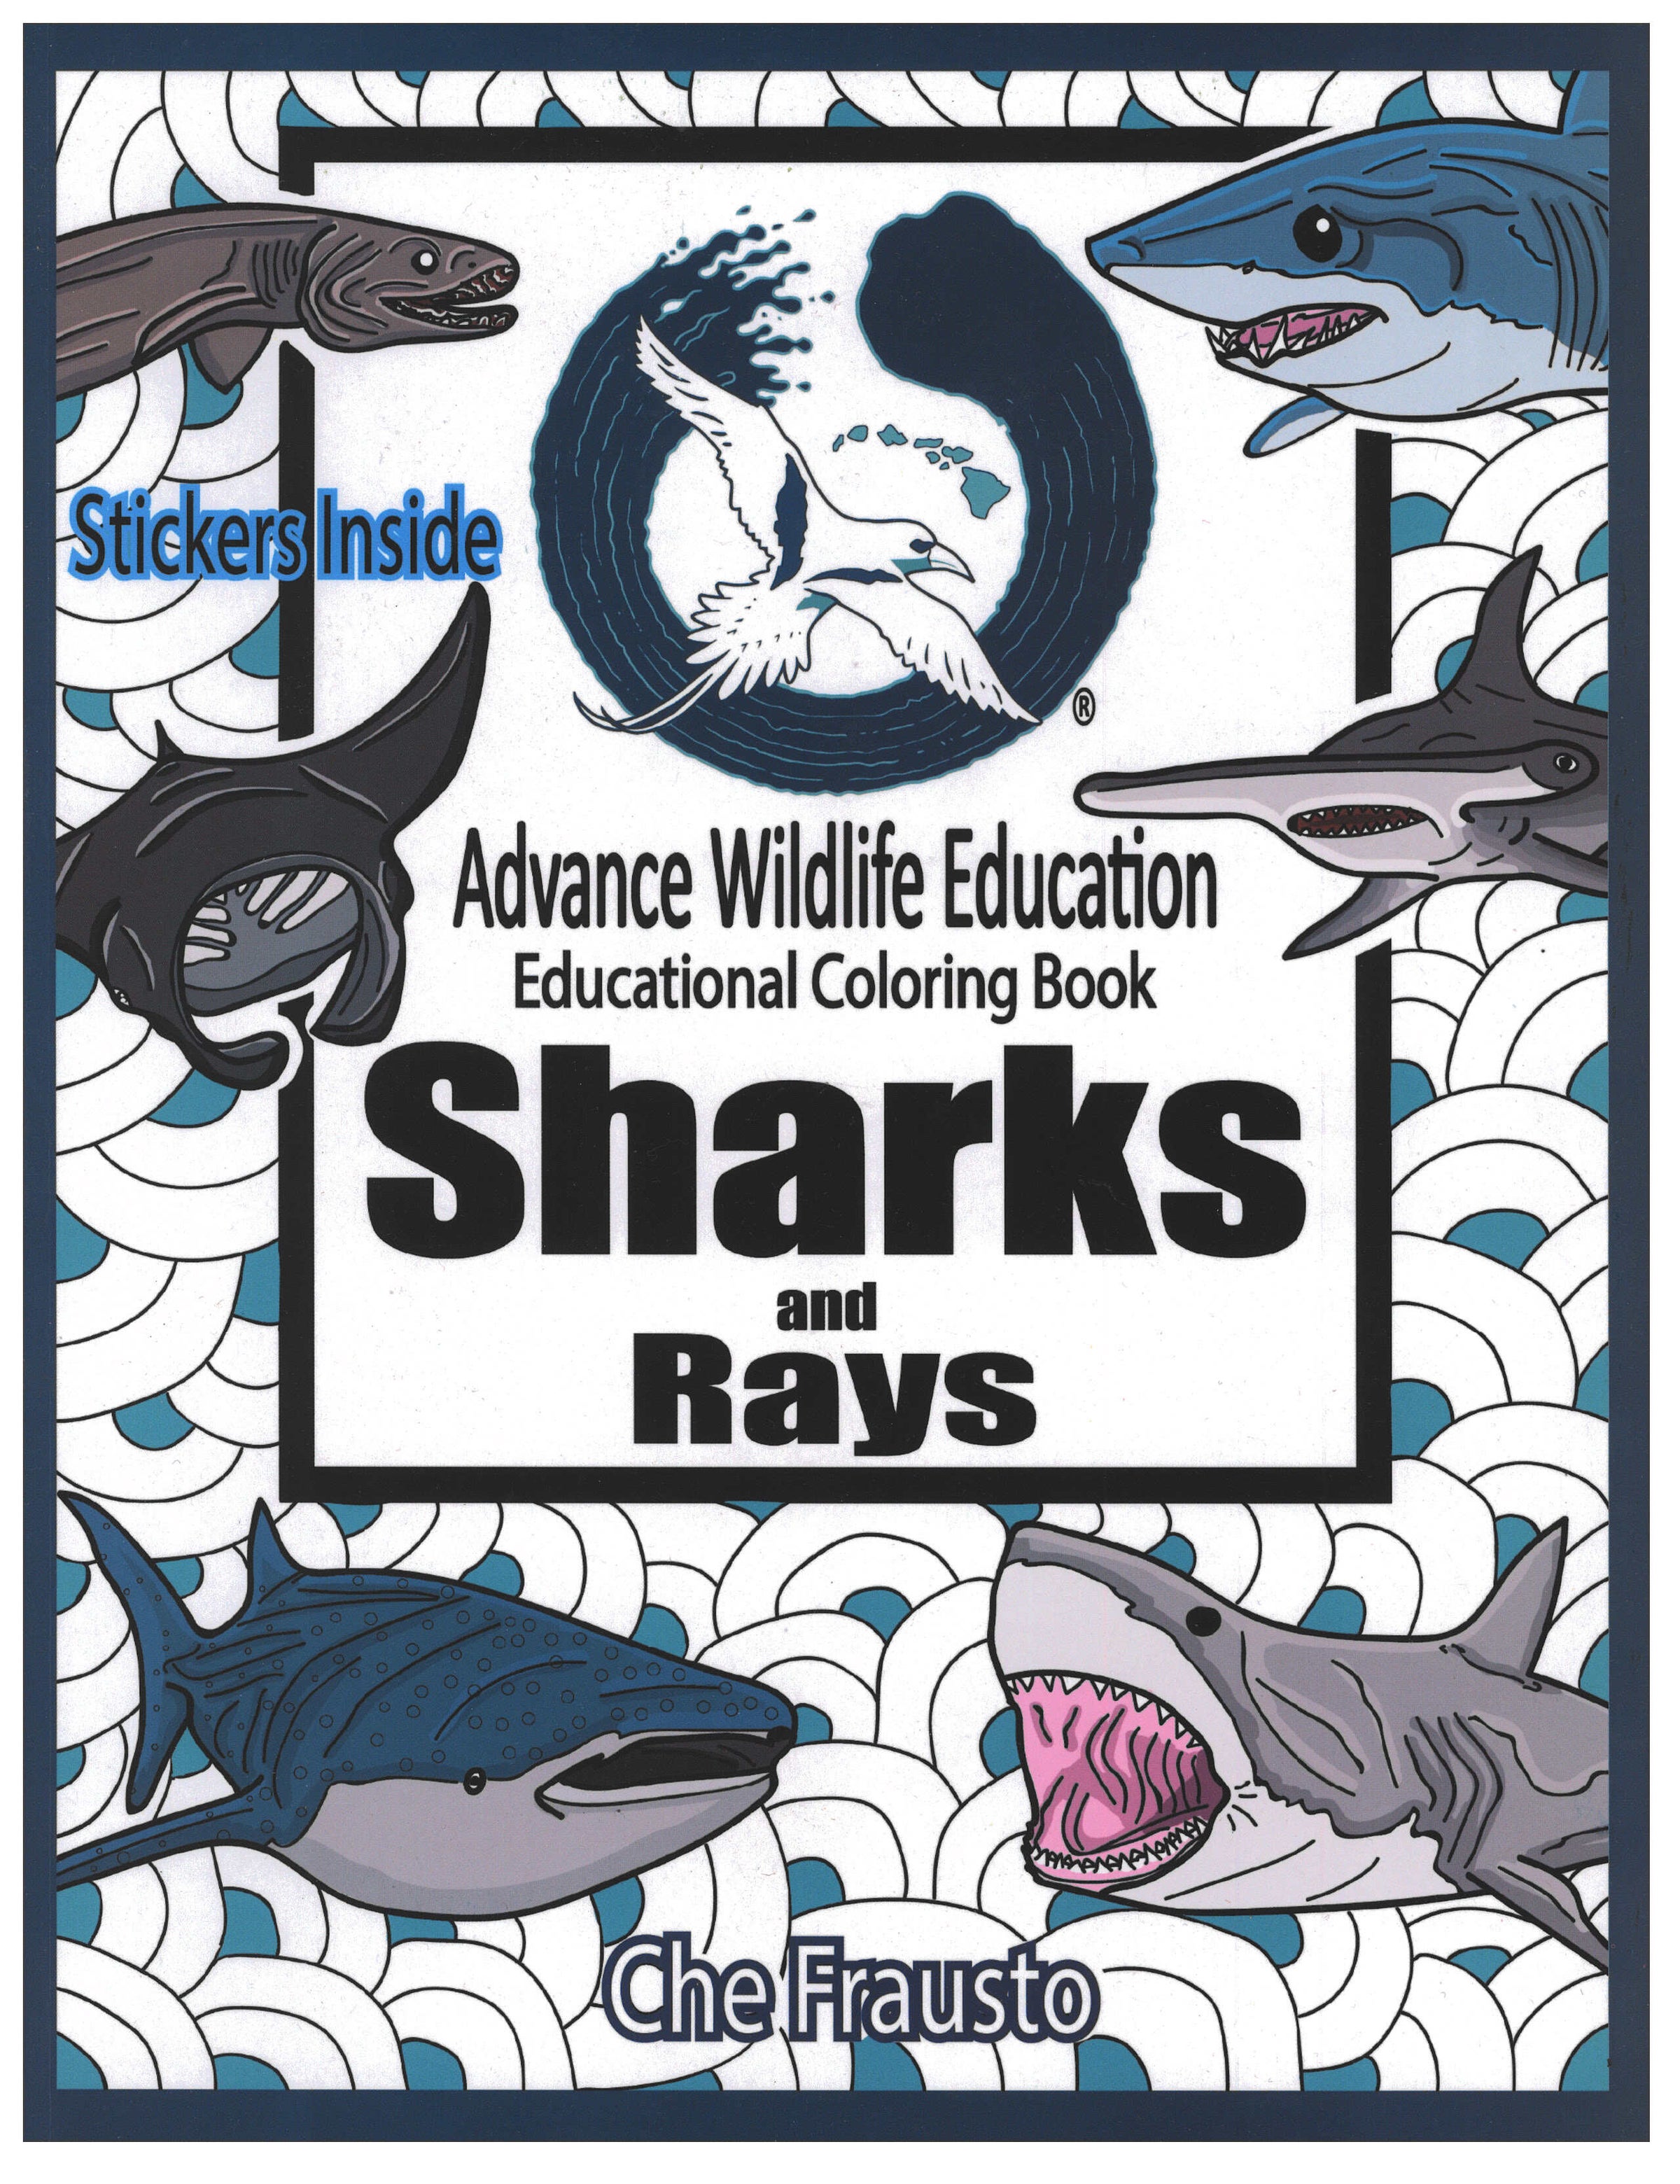 Book - Advance Wildlife Education Sharks & Rays Coloring Book